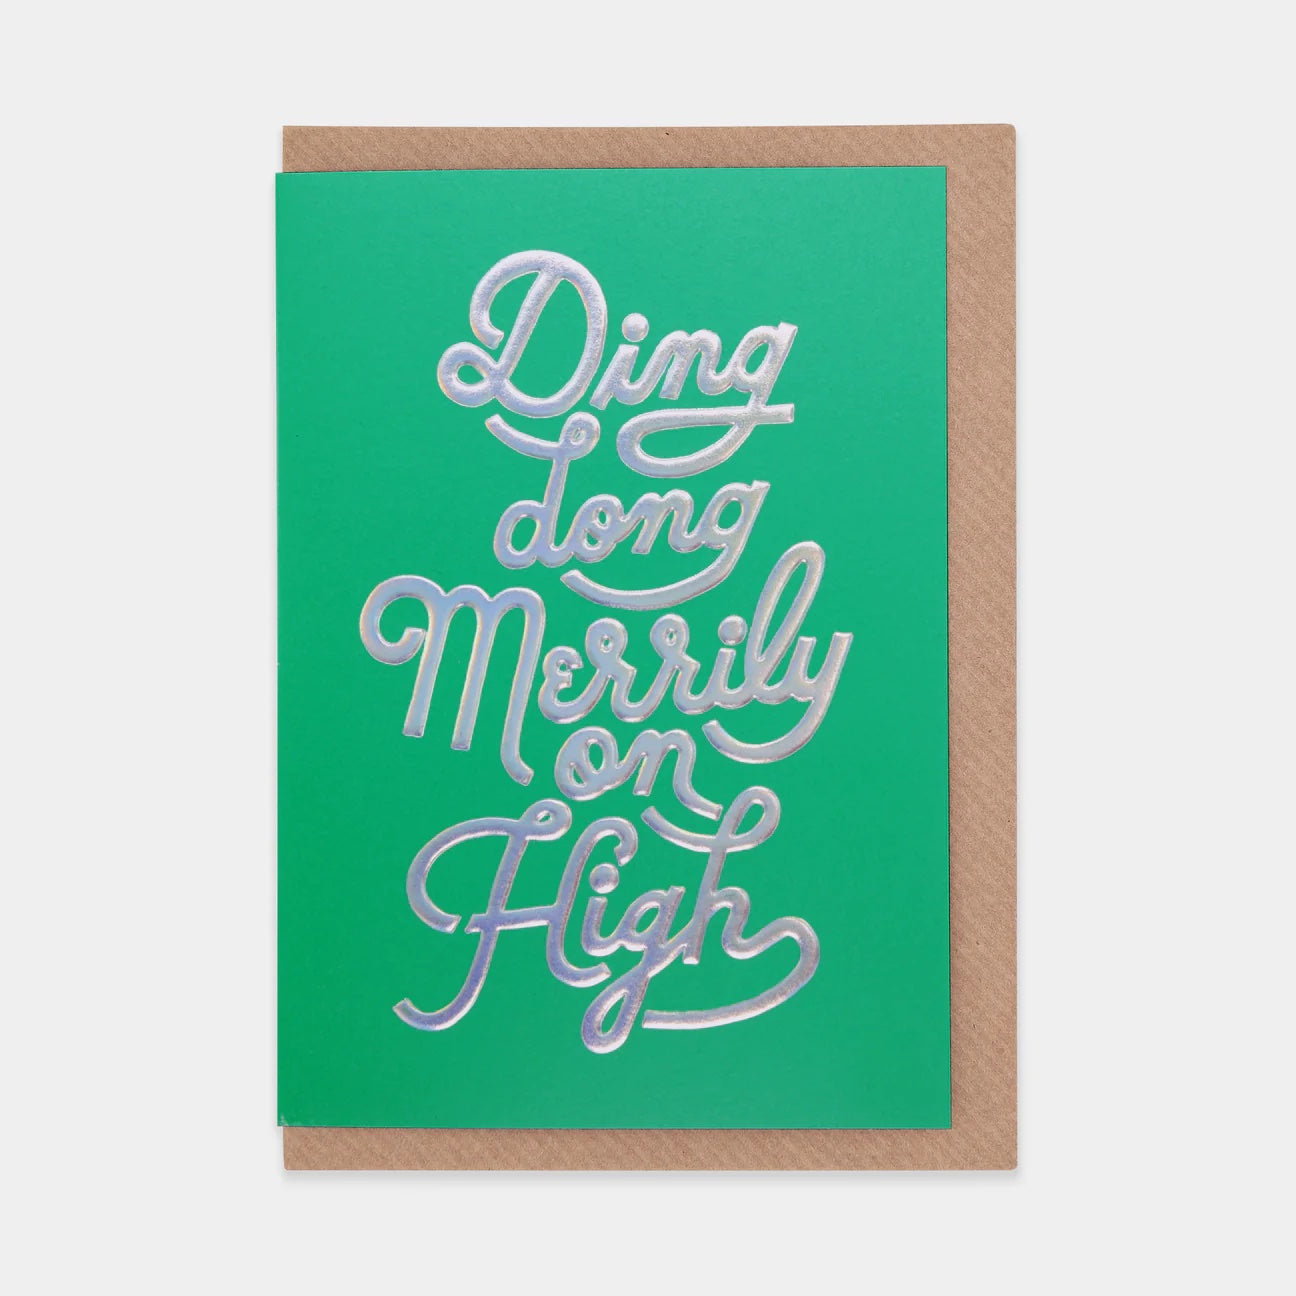 Ding Dong Merrily On High Card | Blank | by Evermade - Lifestory